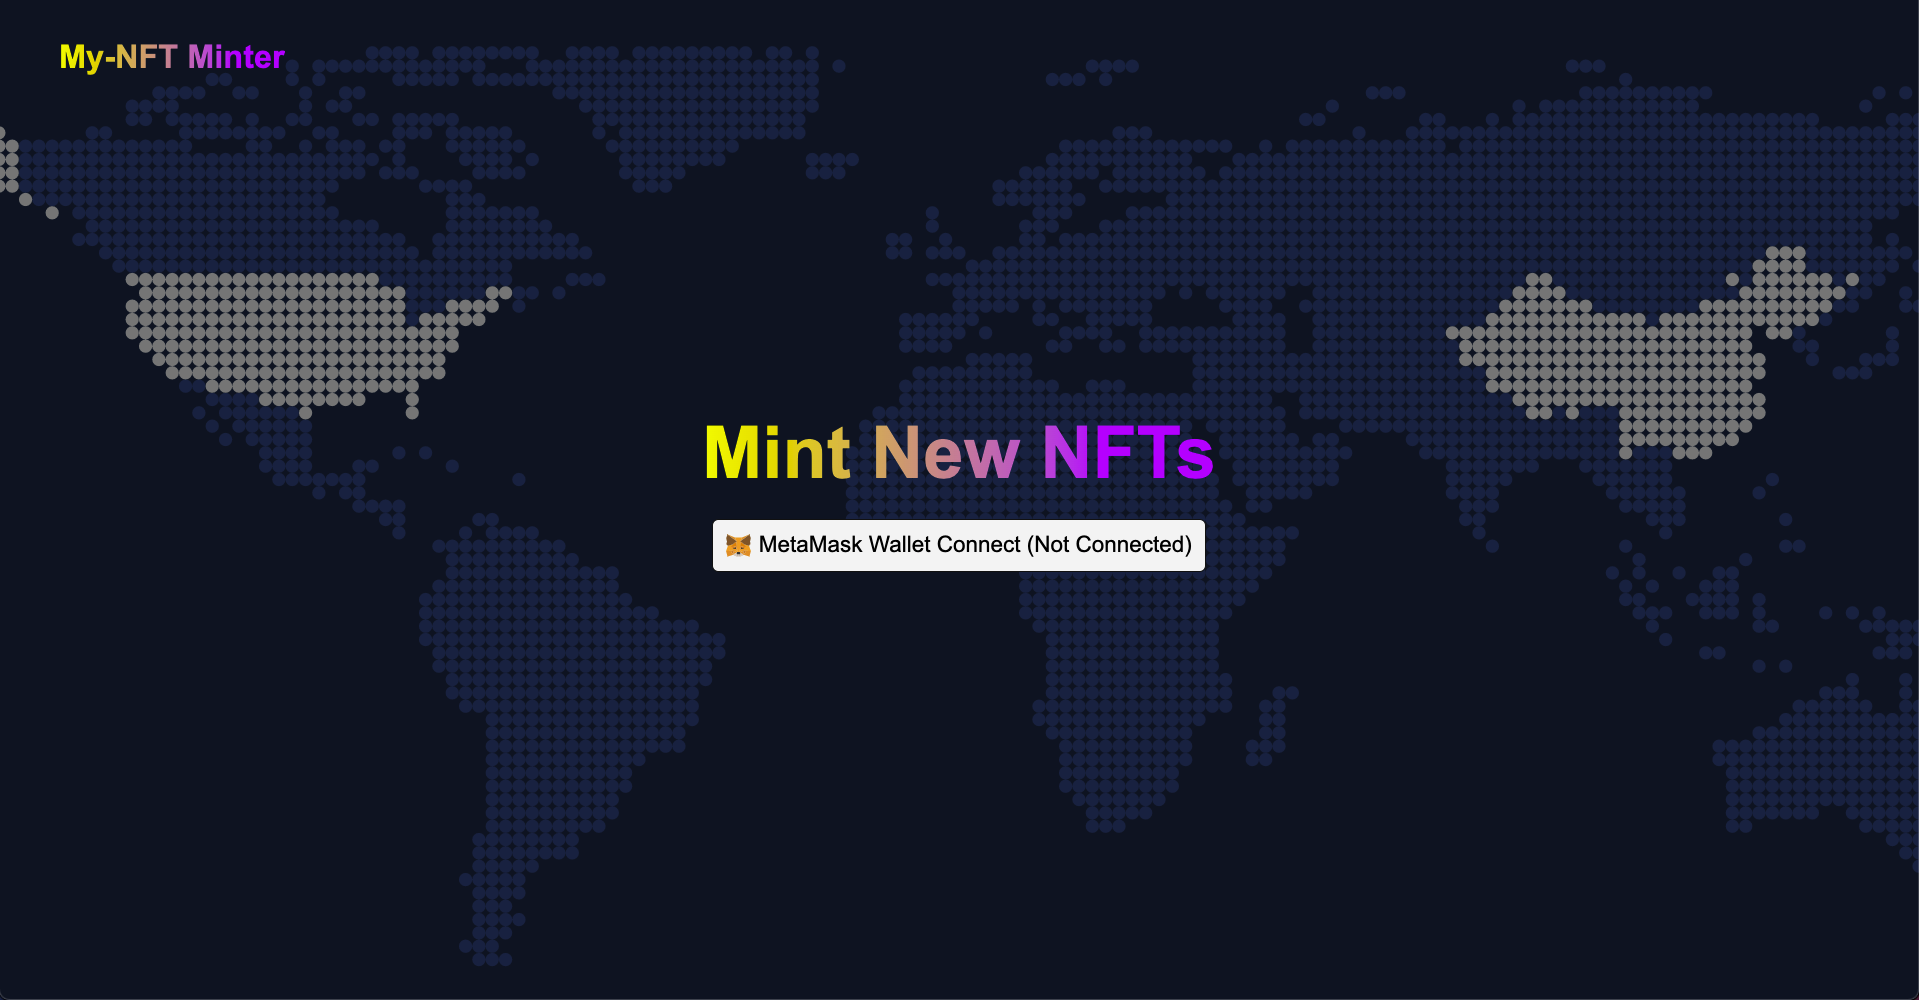 This is how NFT minting dApp works, the user connects their wallet on the dApp